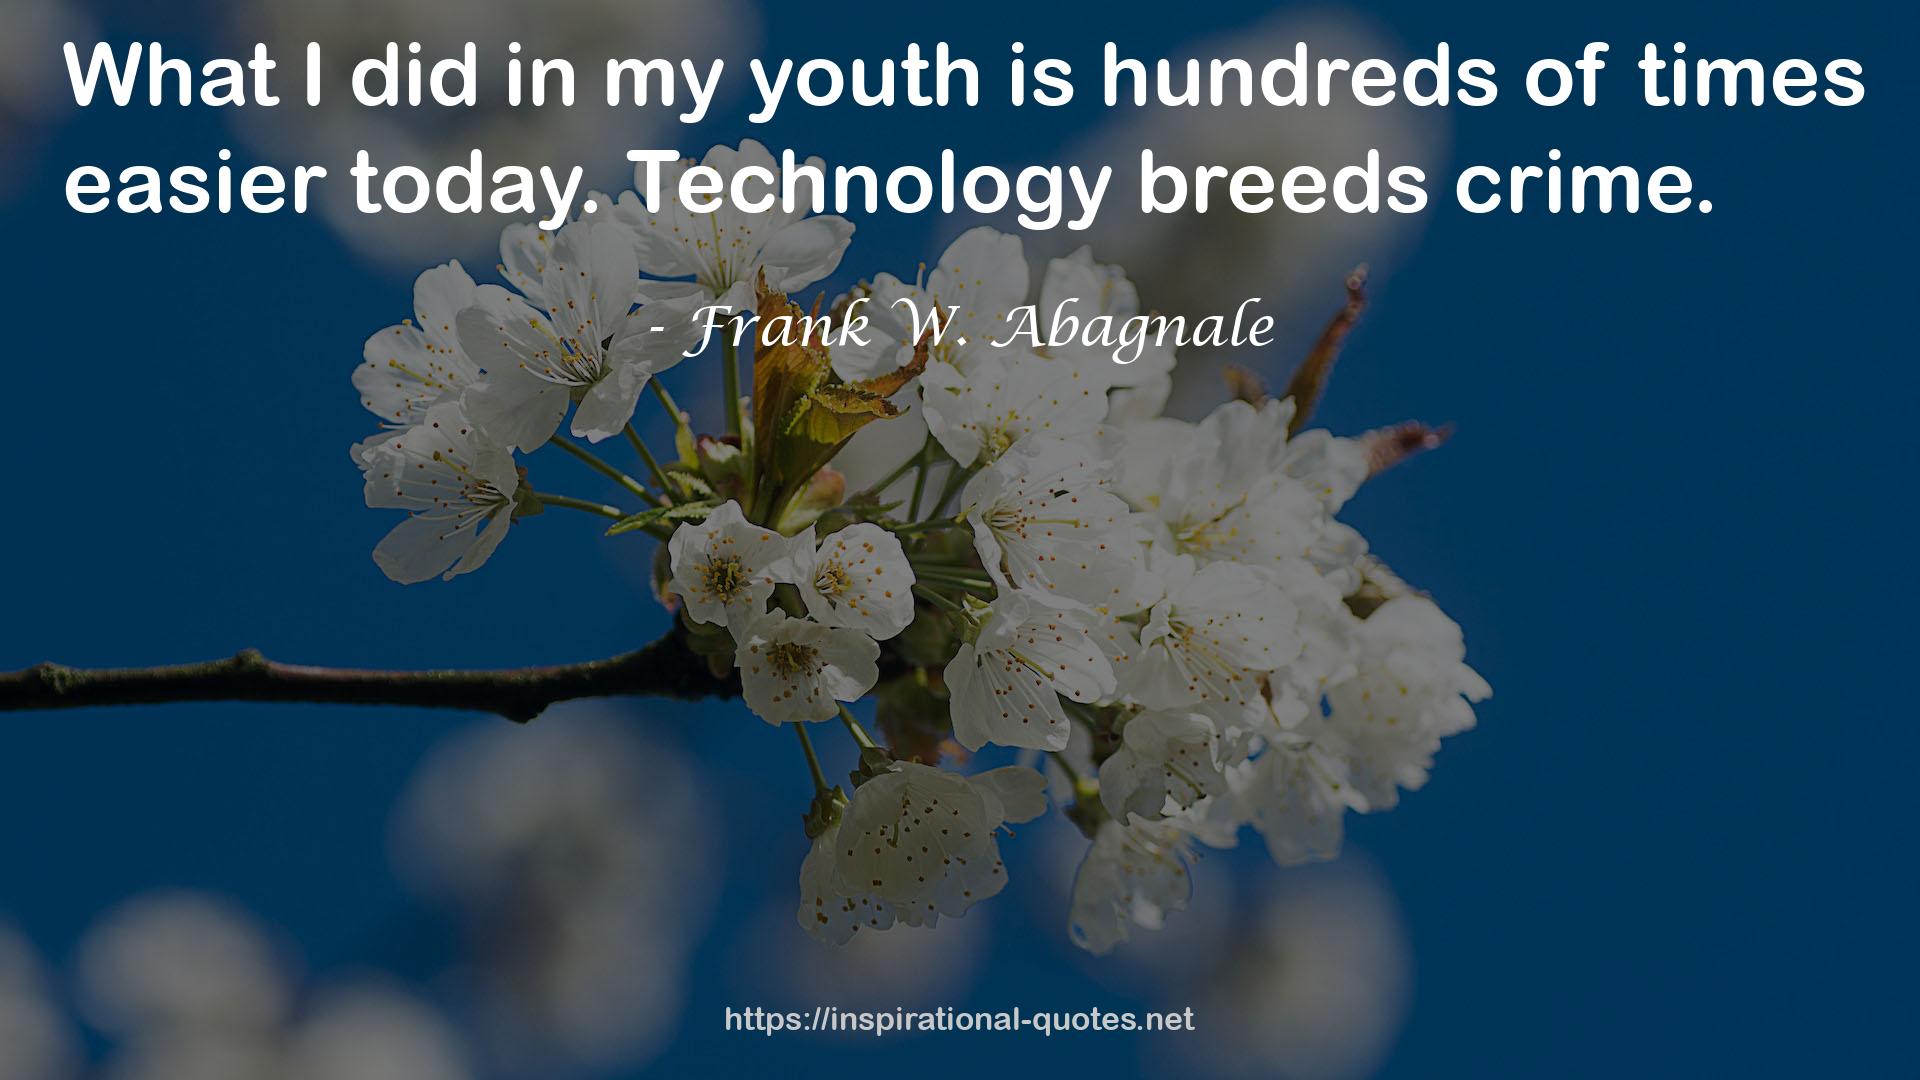 Frank W. Abagnale QUOTES